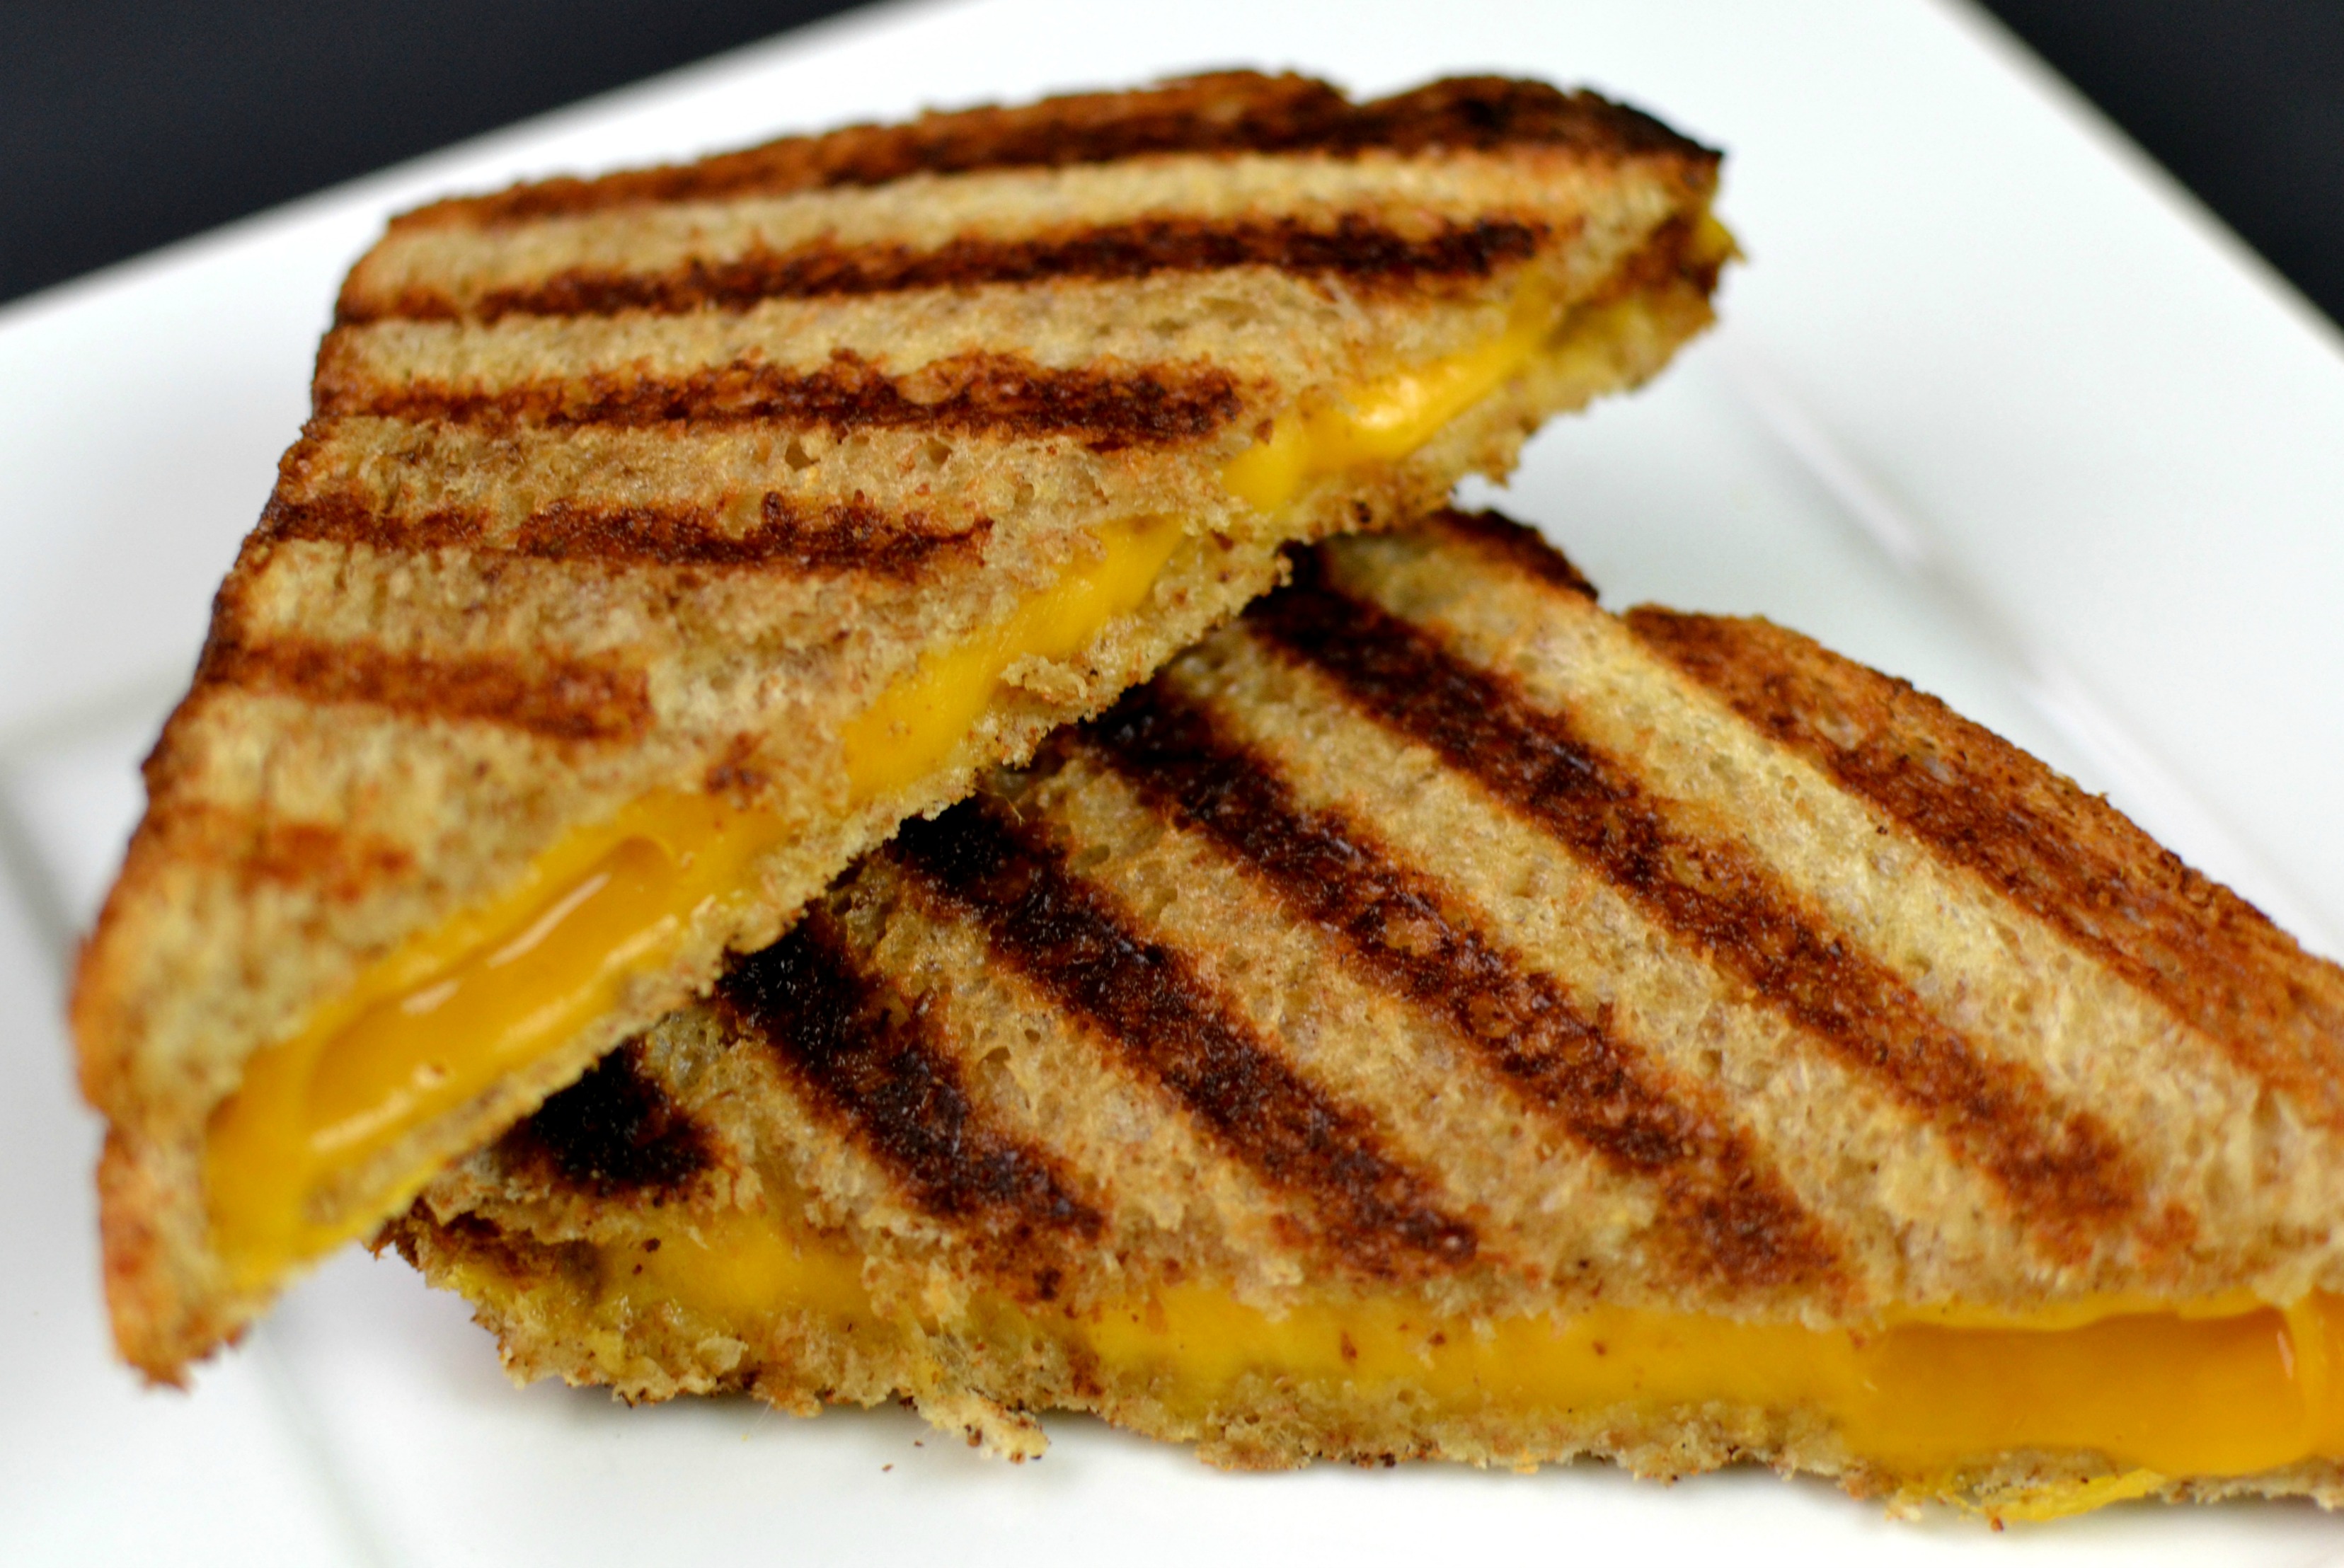 And call me crazy, but a grilled cheese just has to be cut on the diagonal....